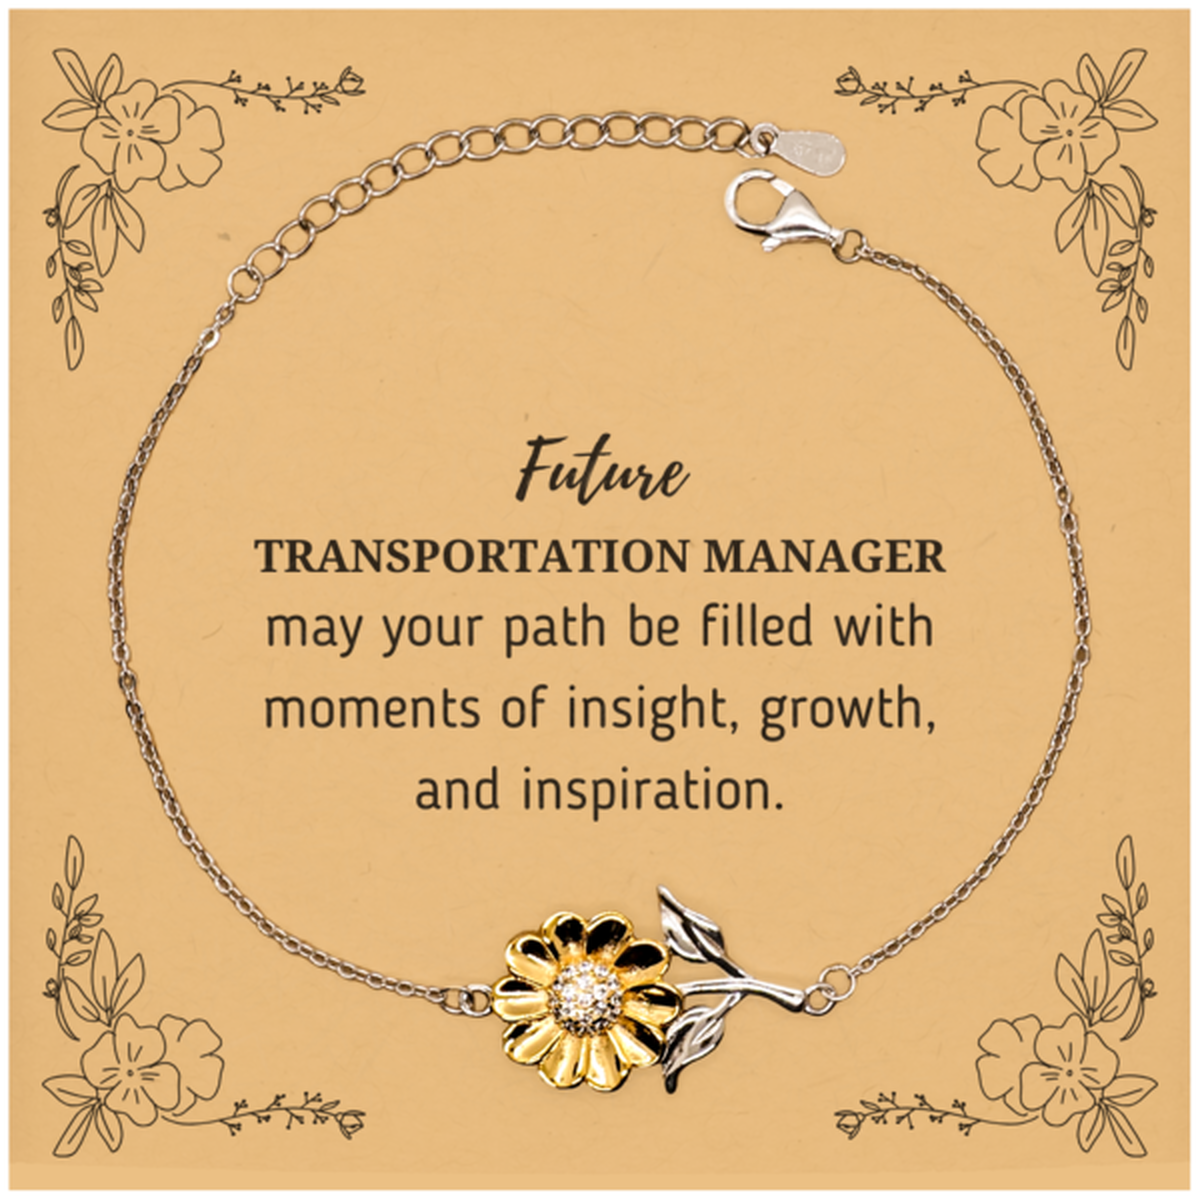 Future Transportation Manager Gifts, May your path be filled with moments of insight, Graduation Gifts for New Transportation Manager, Christmas Unique Sunflower Bracelet For Men, Women, Friends